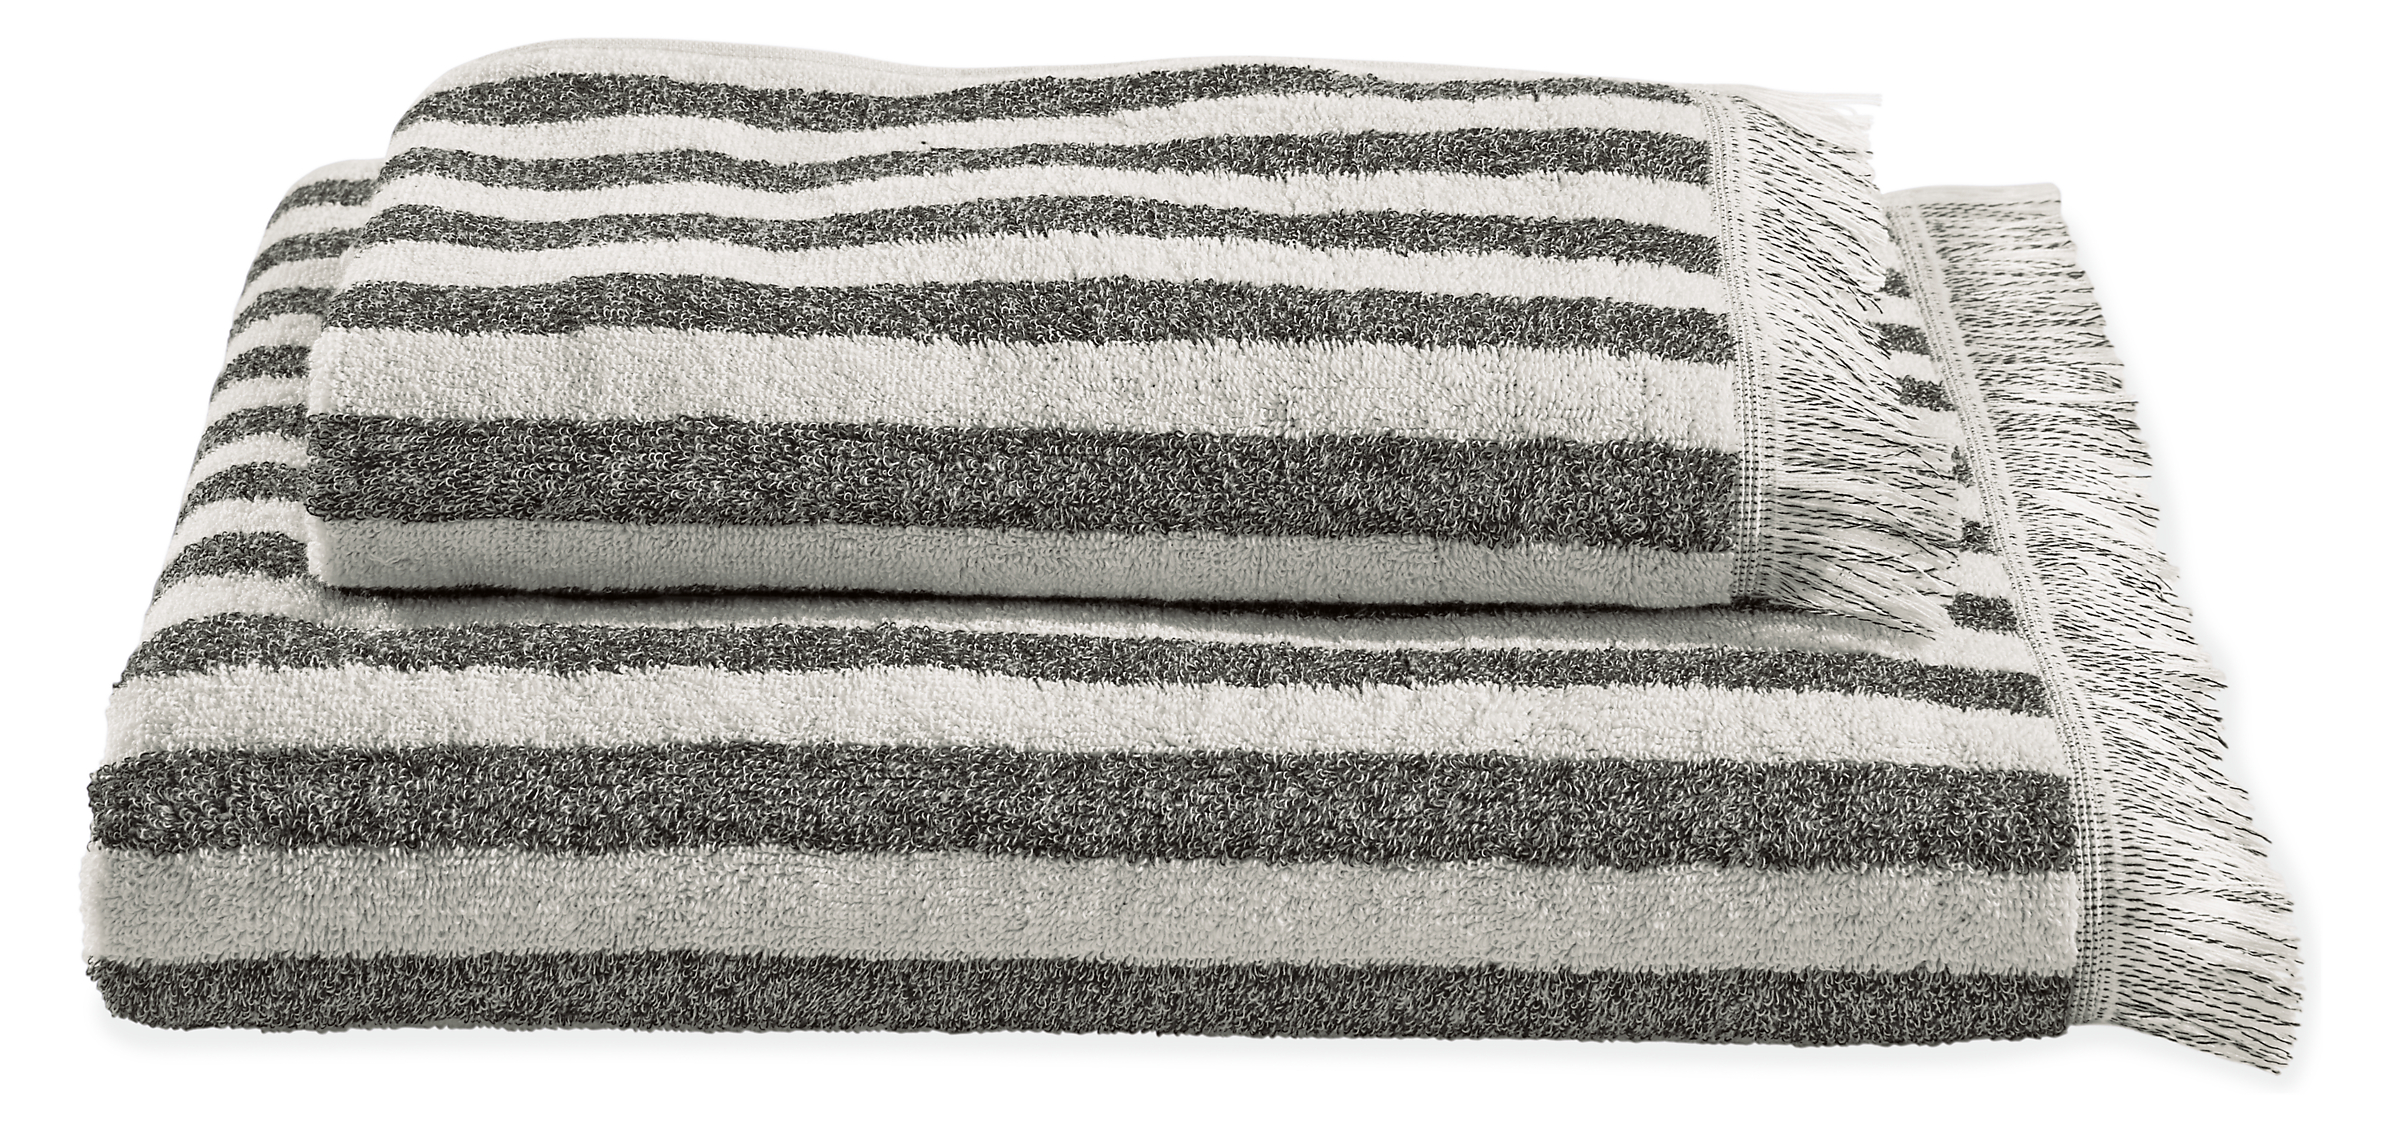 Fence Towels in Charcoal